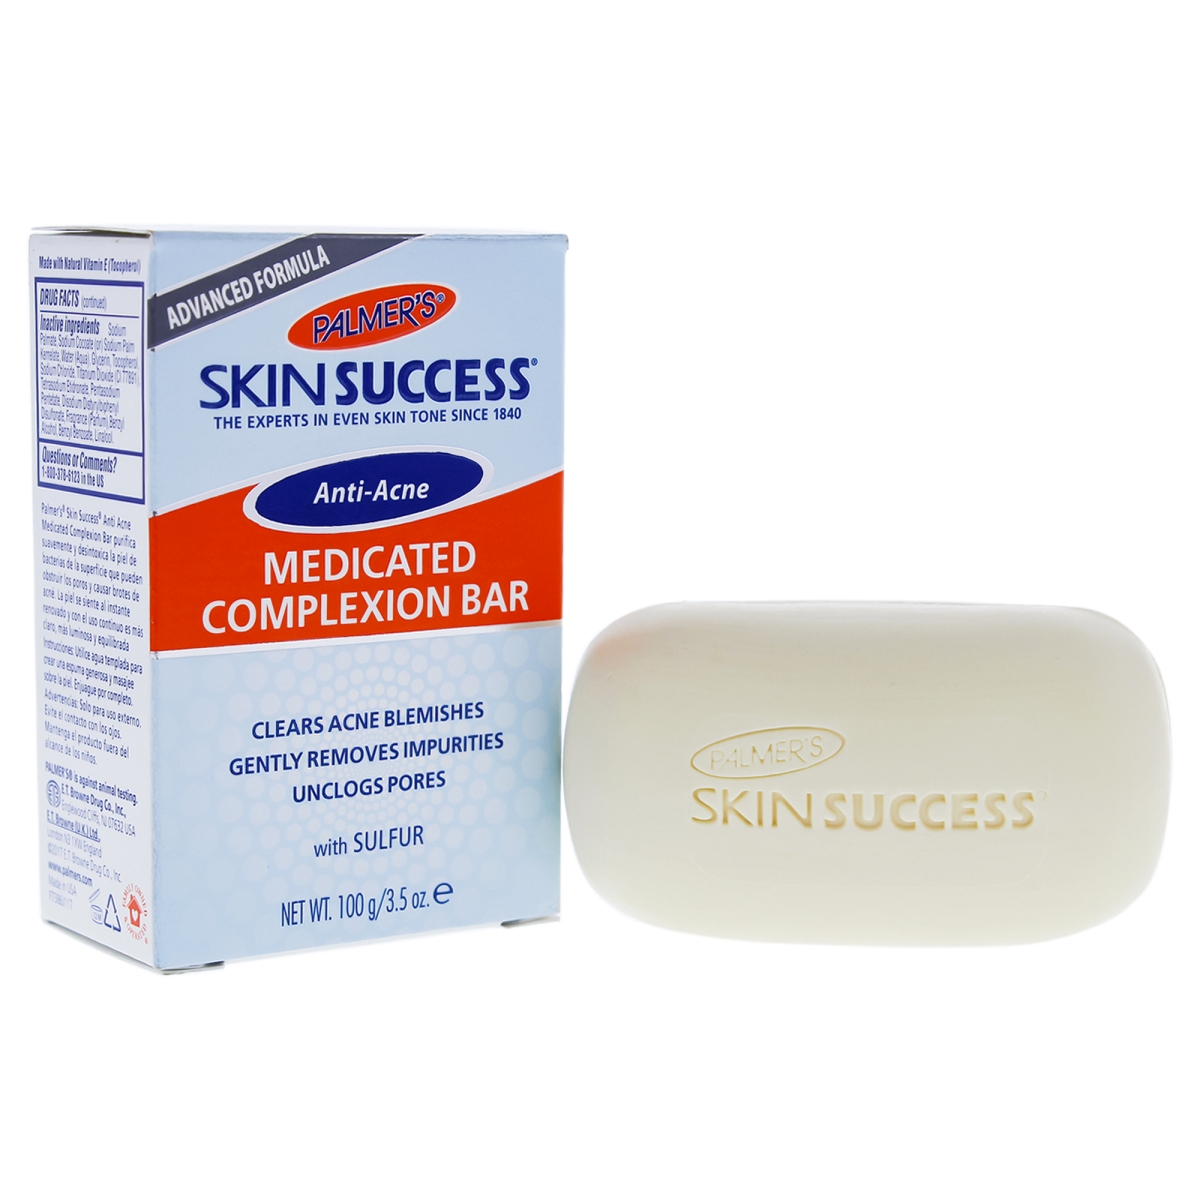 I0088480 Skin Success Eventone Medicated Complexion Bar Cleanser For Unisex - 3.5 Oz